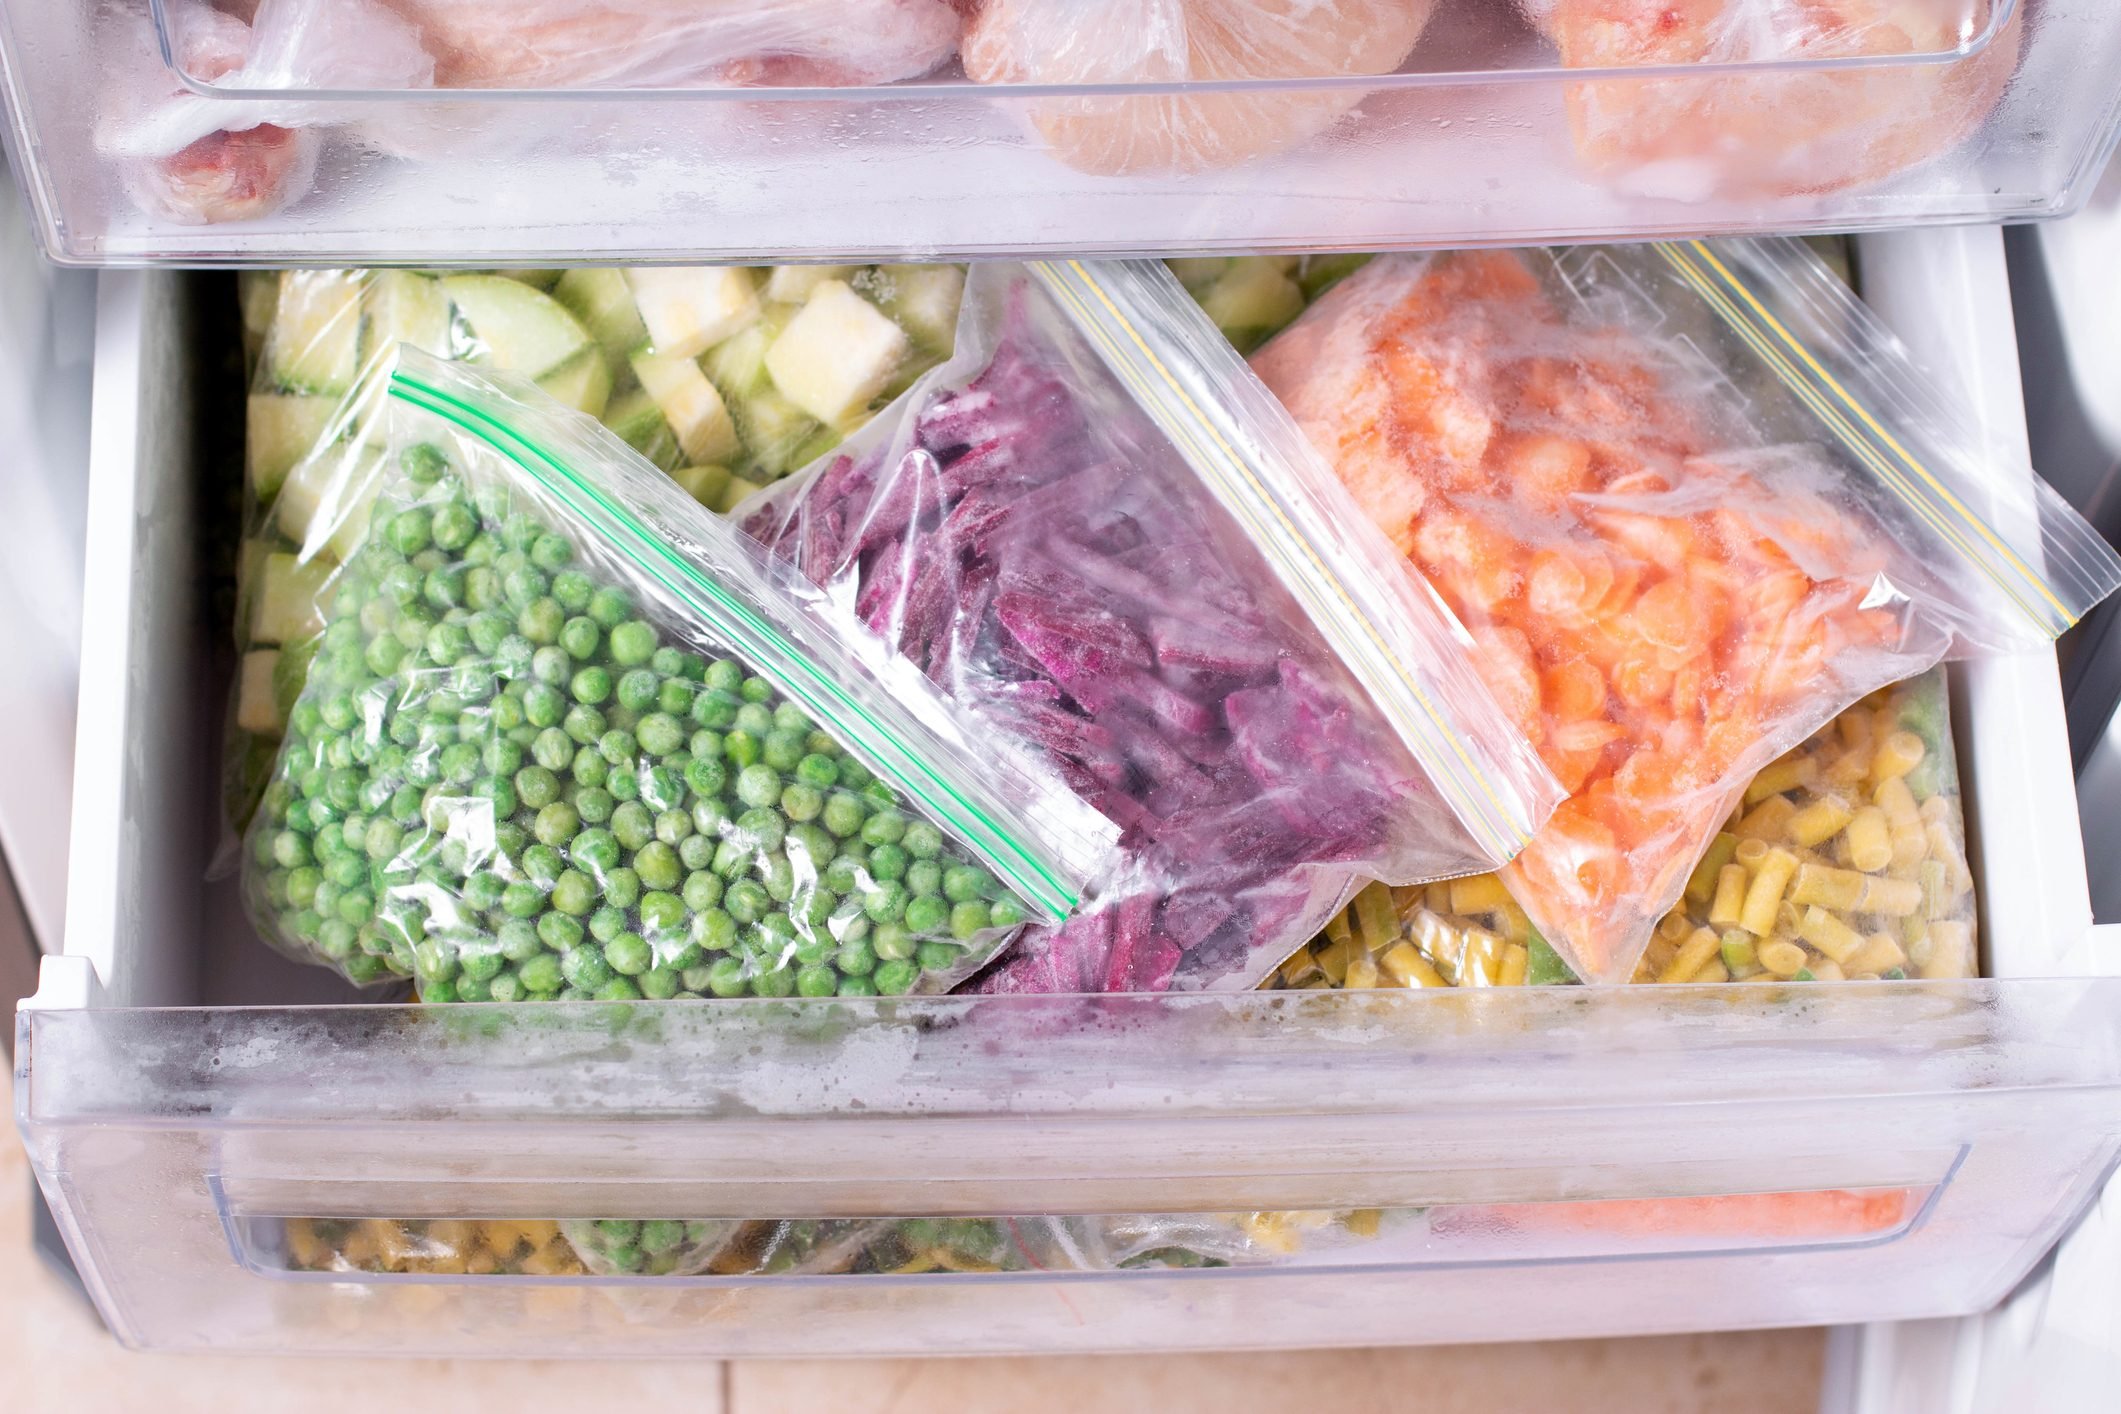 The Best Freezer-Safe Containers & Other Packaging for Freezing Food